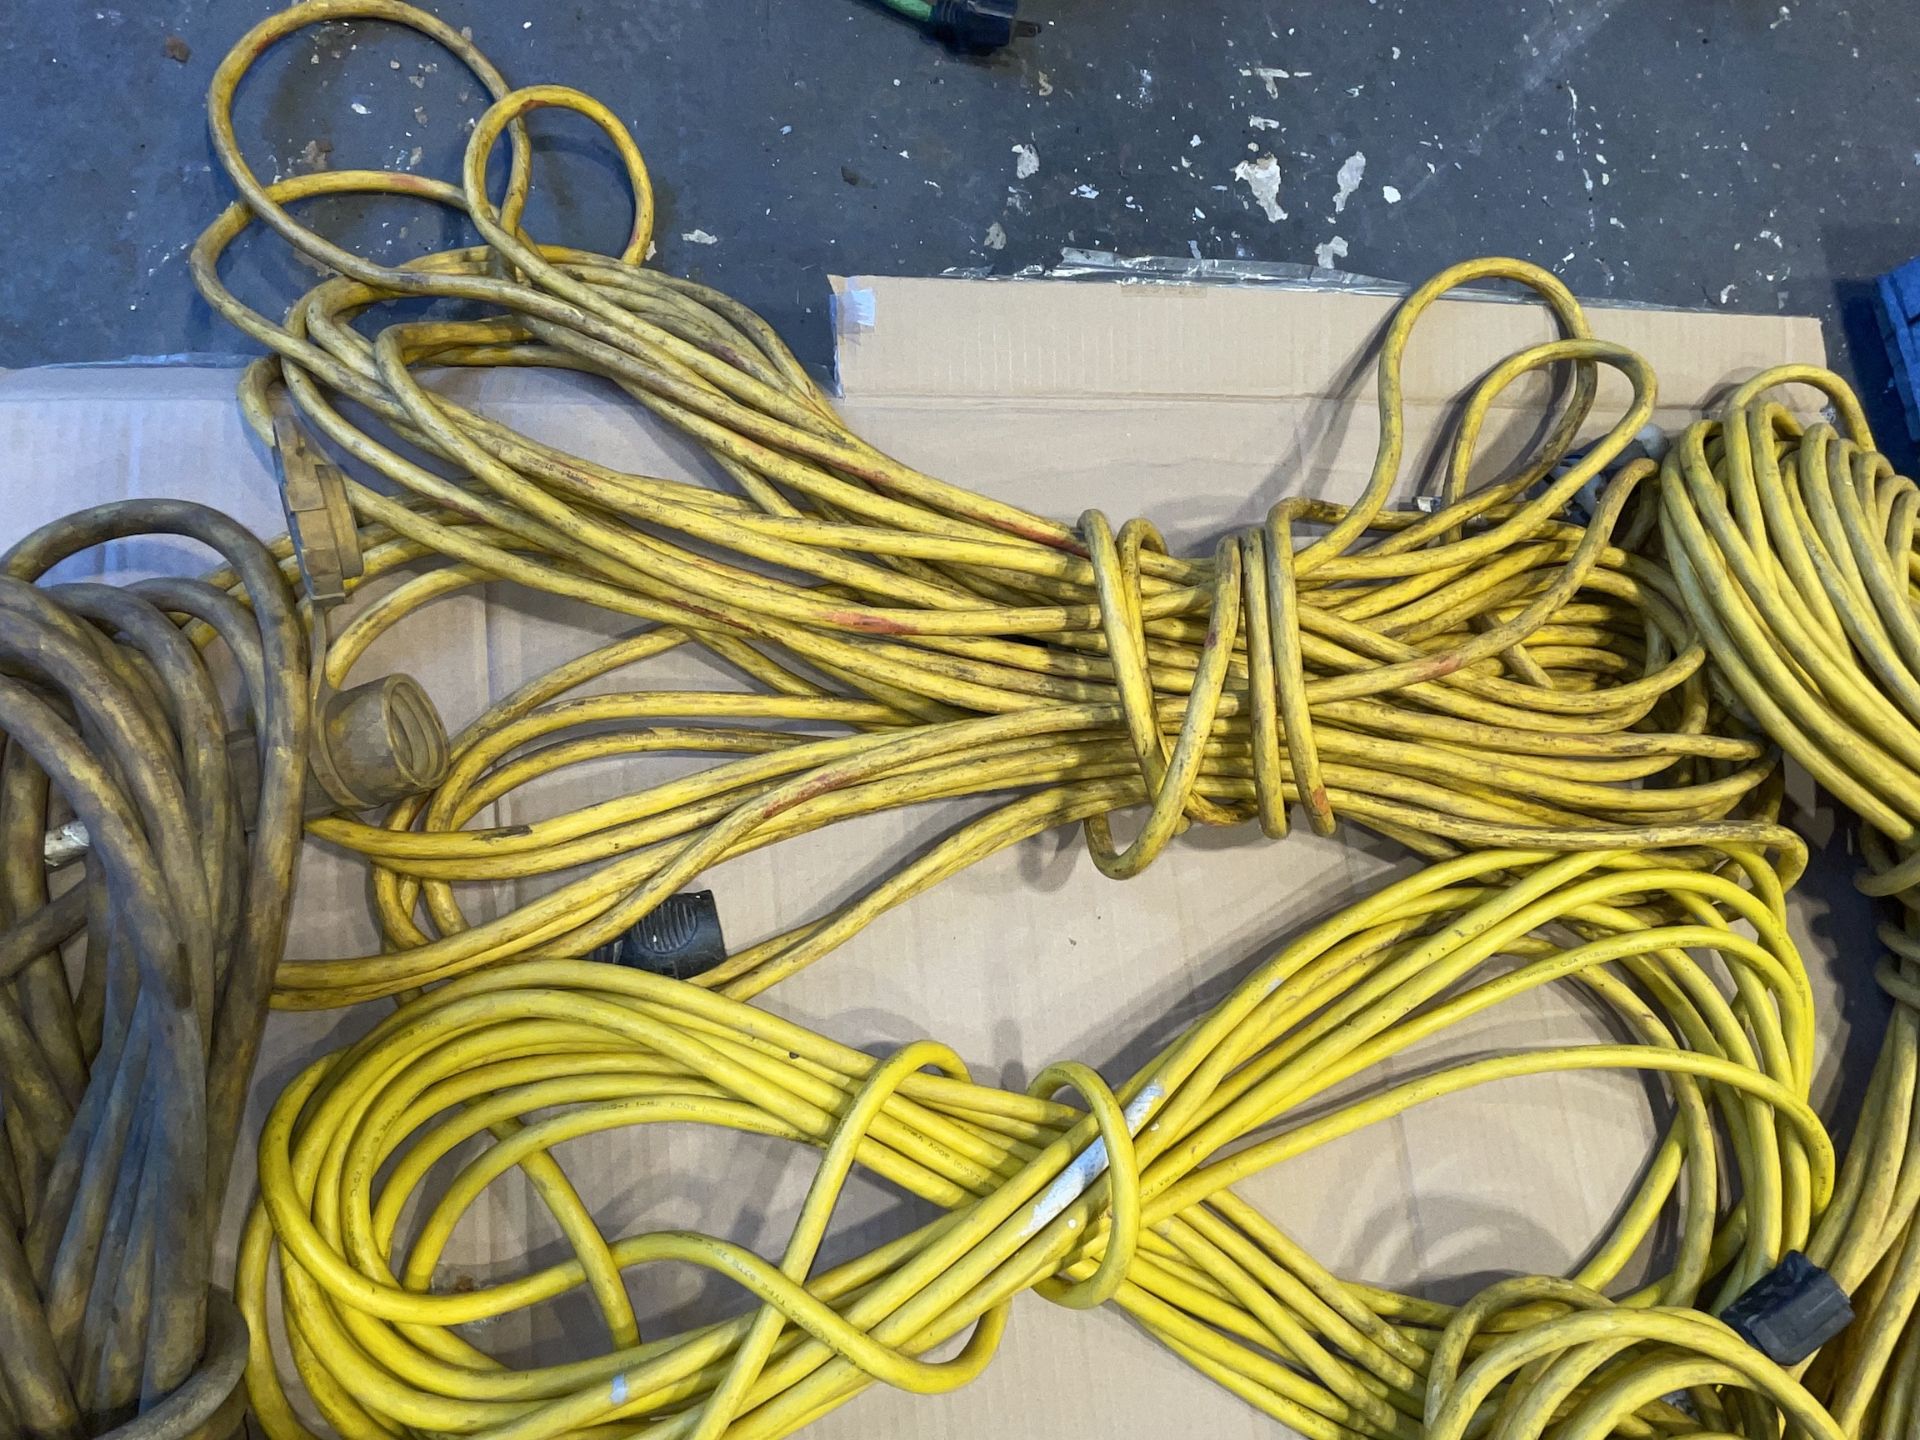 Lot of Extension Cords - Upland - Image 4 of 13